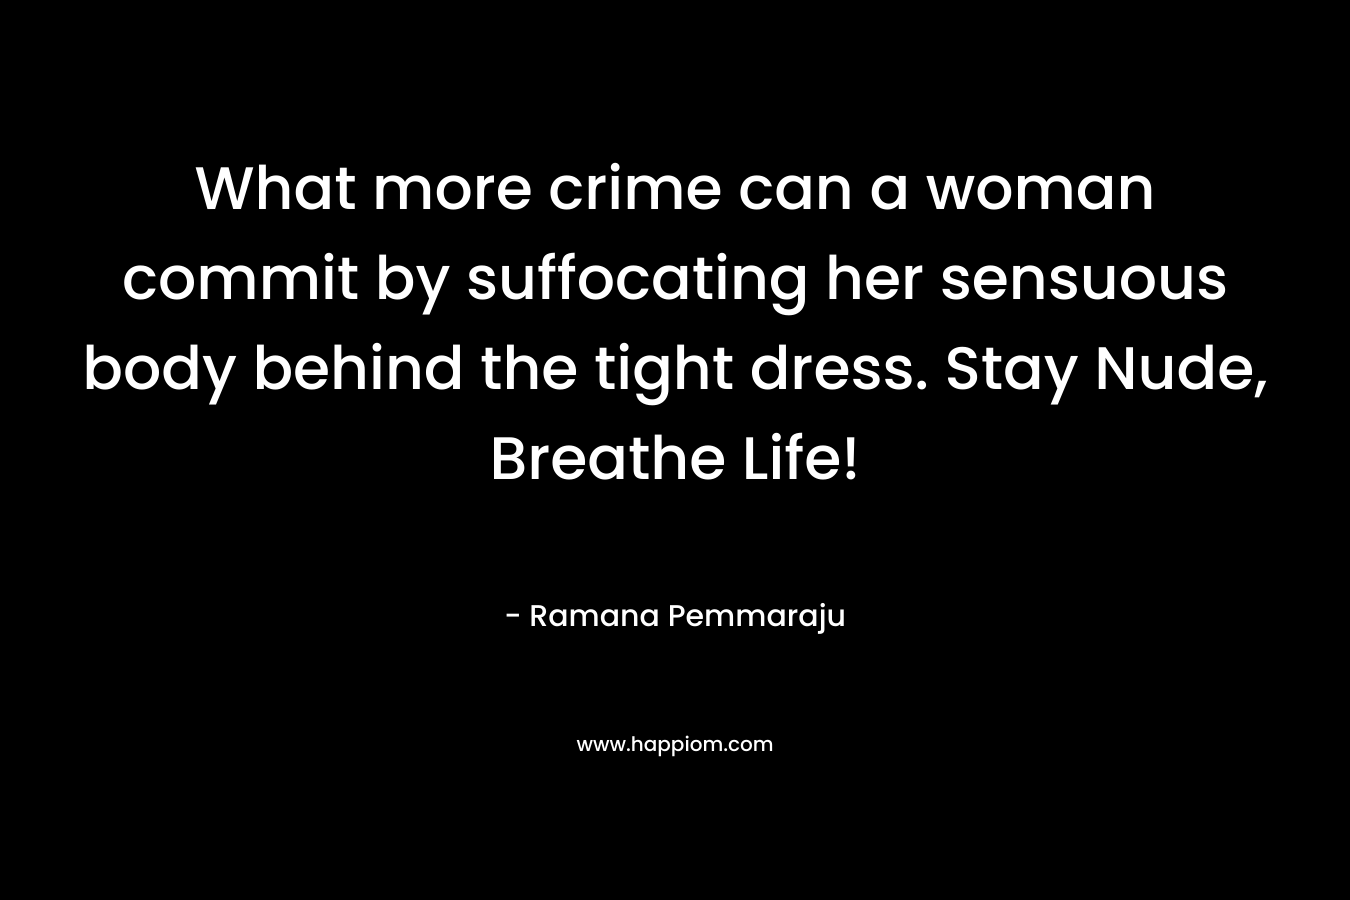 What more crime can a woman commit by suffocating her sensuous body behind the tight dress. Stay Nude, Breathe Life! – Ramana Pemmaraju